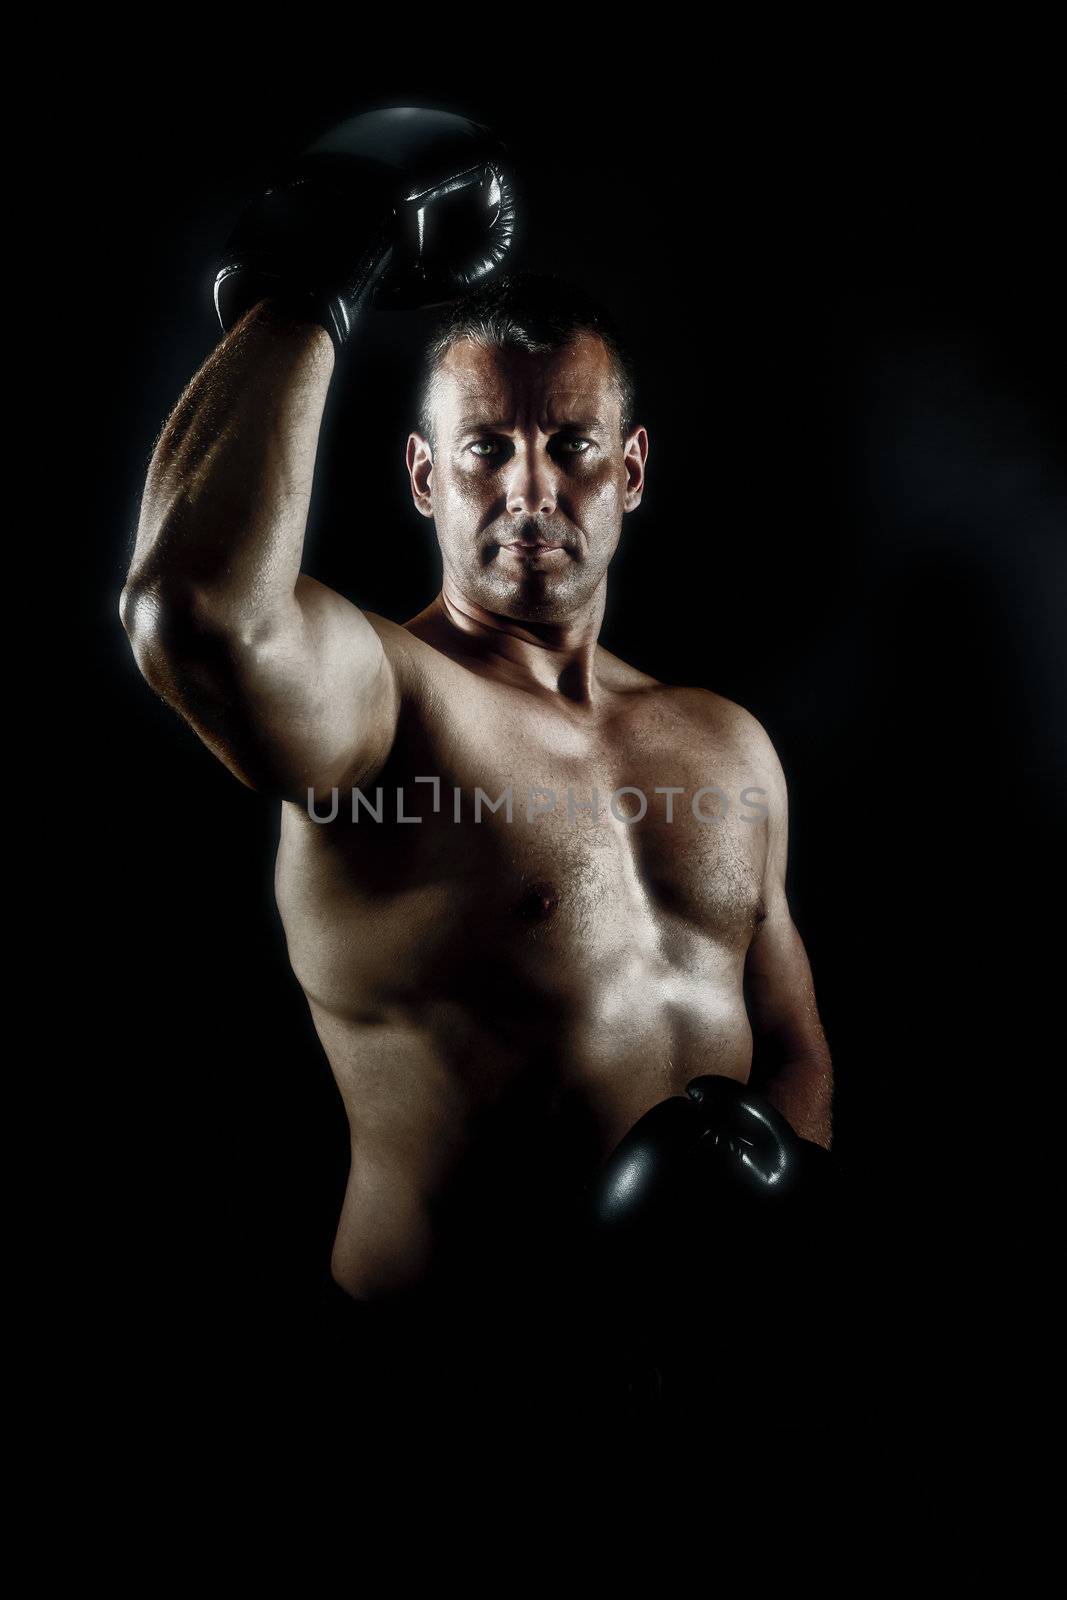 An image of a muscular male in a heroic pose